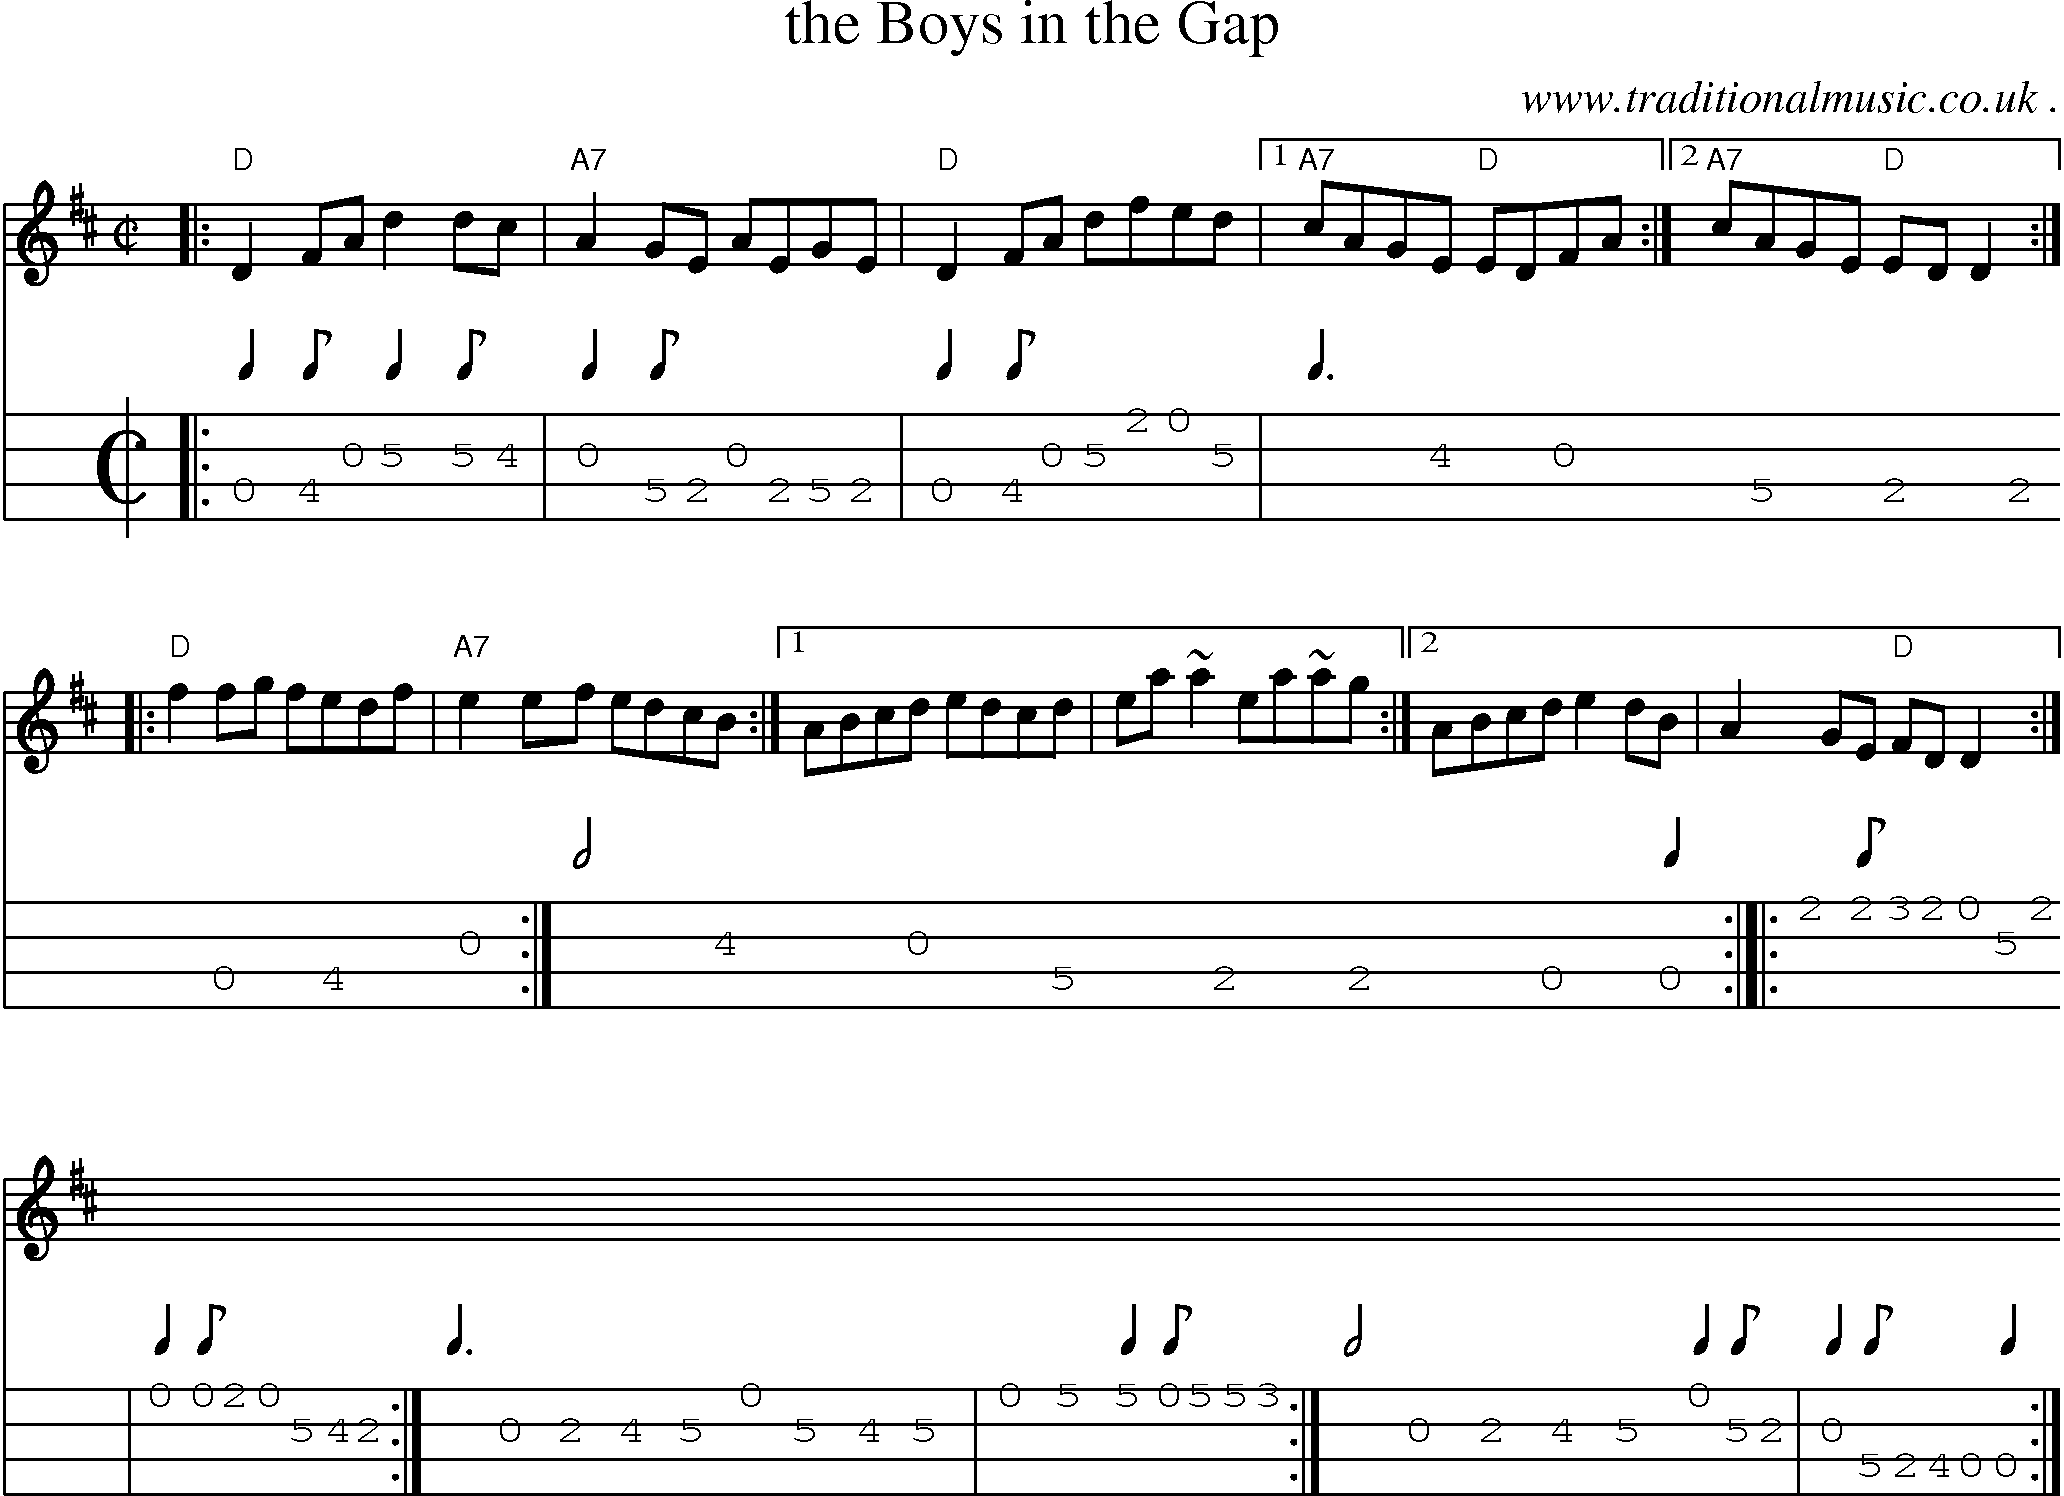 Sheet-music  score, Chords and Mandolin Tabs for The Boys In The Gap